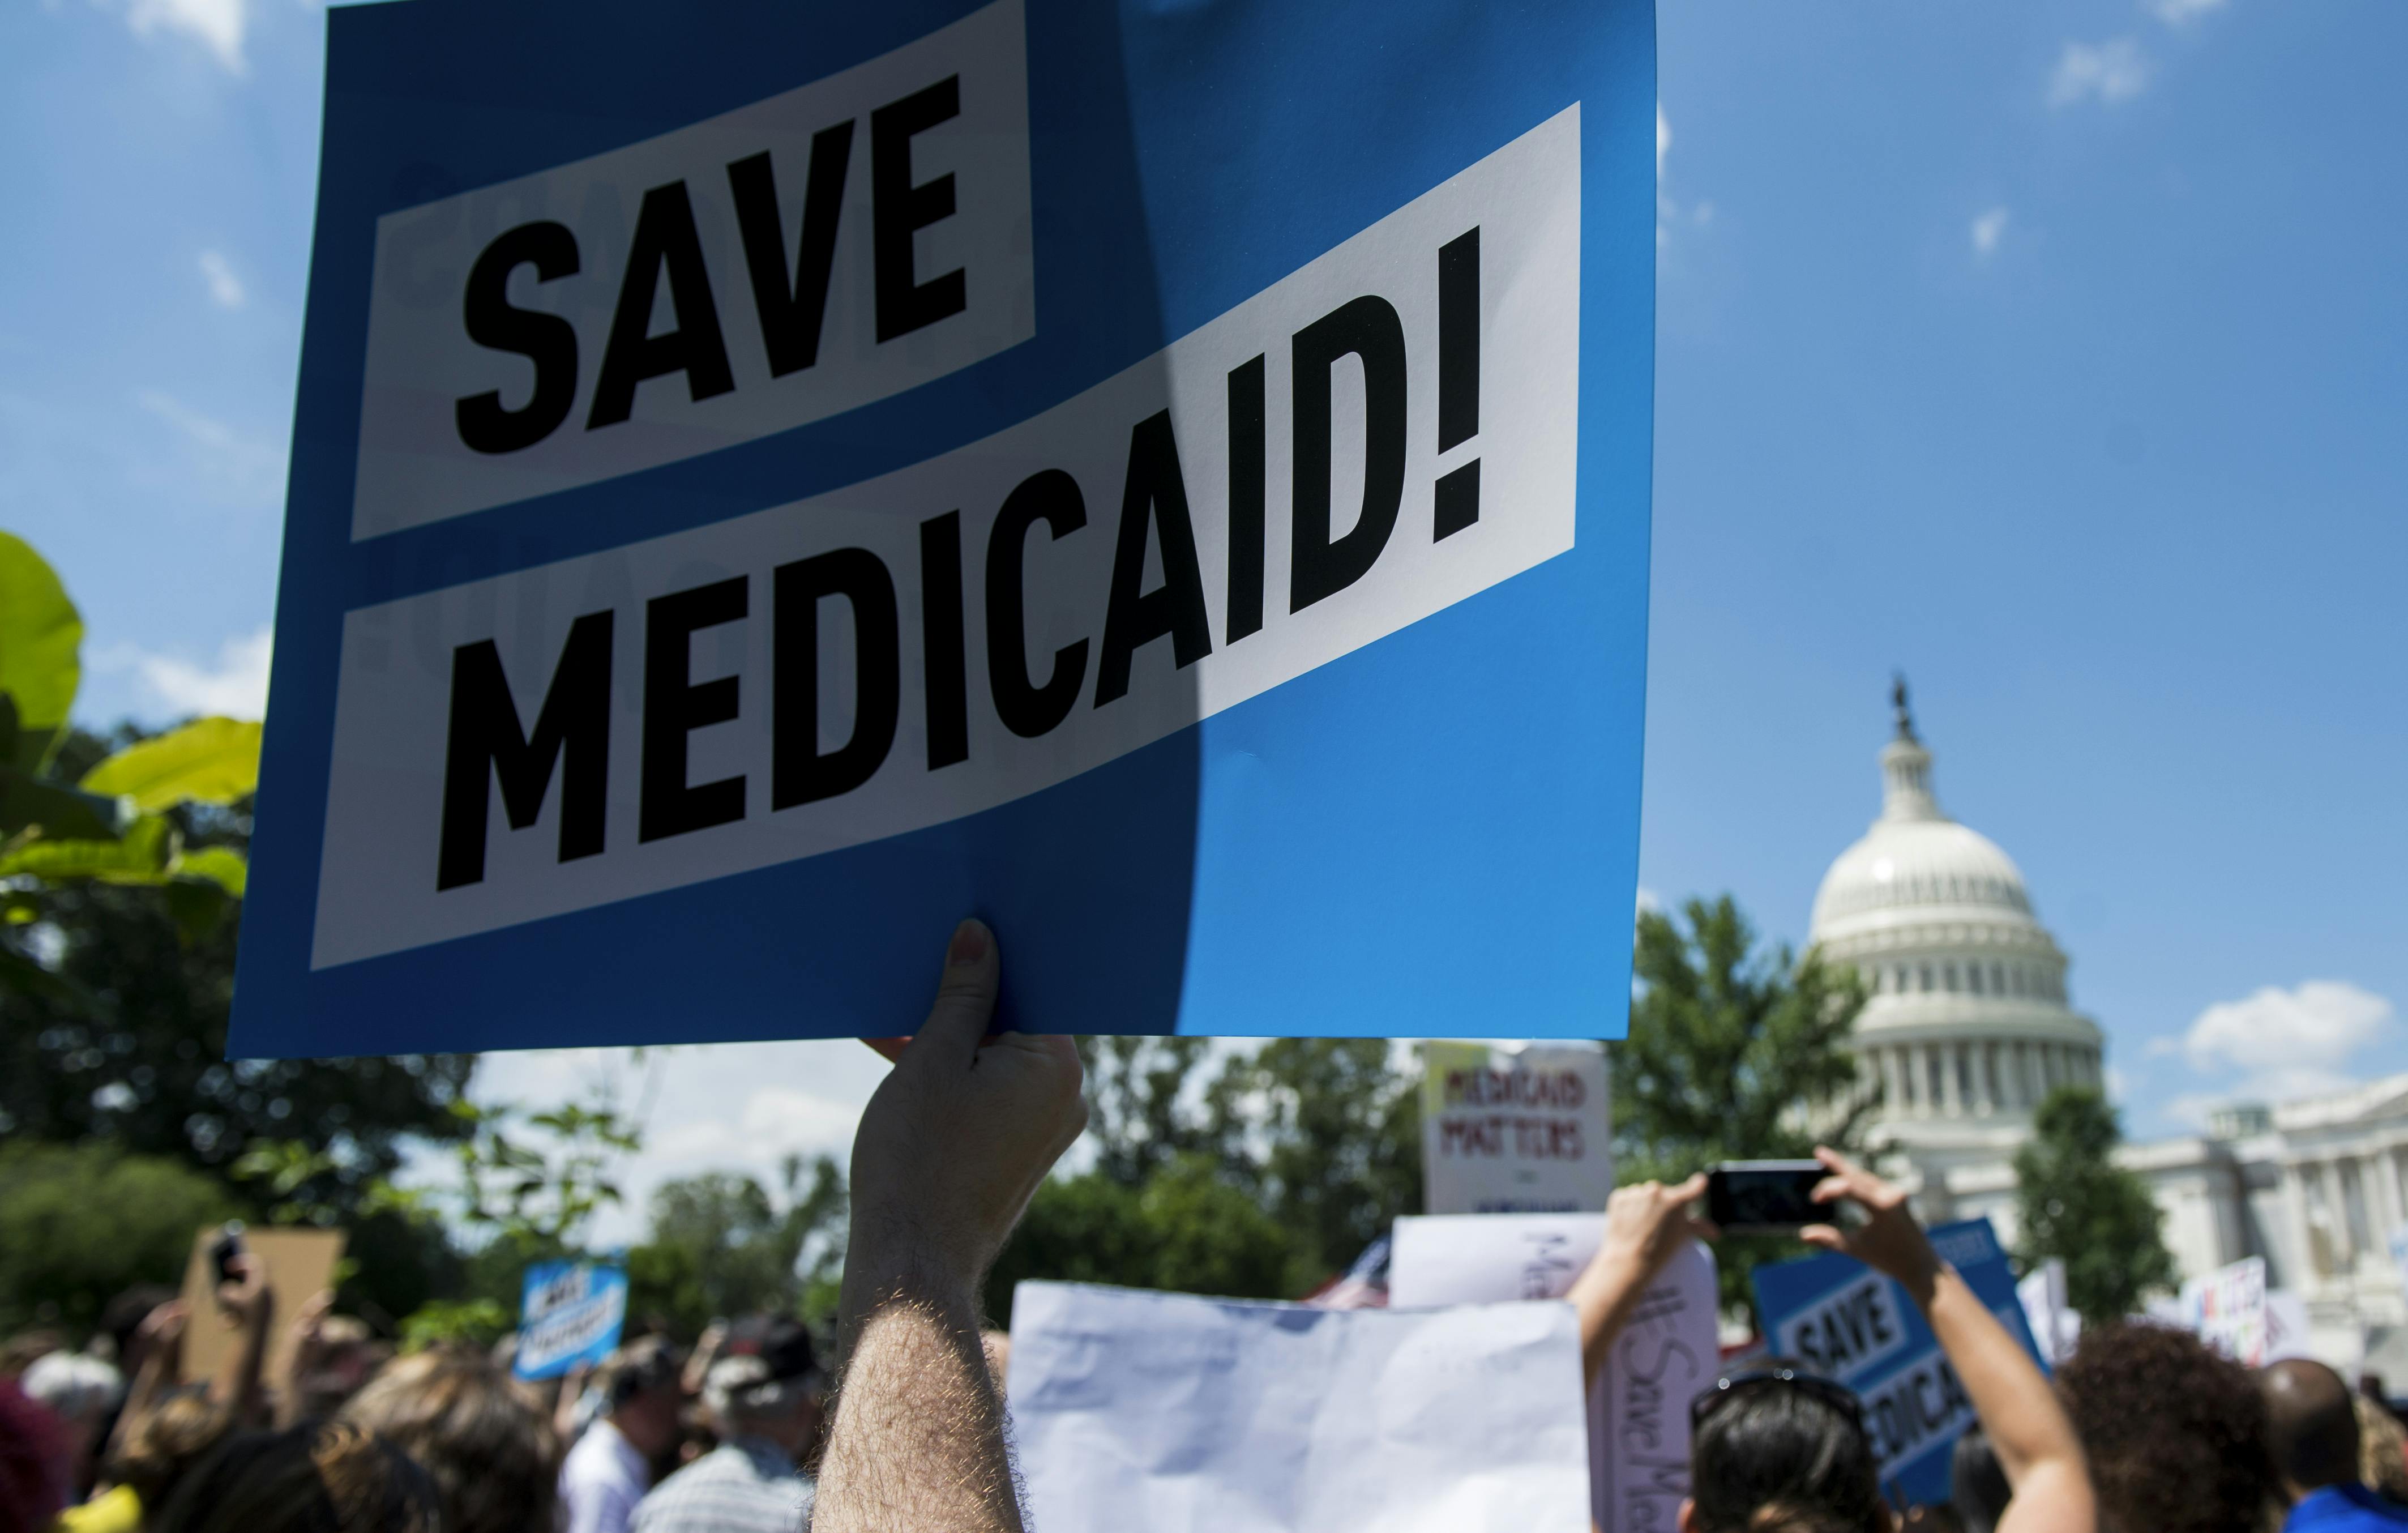 Kicked off Medicaid: Millions at risk as states trim rolls